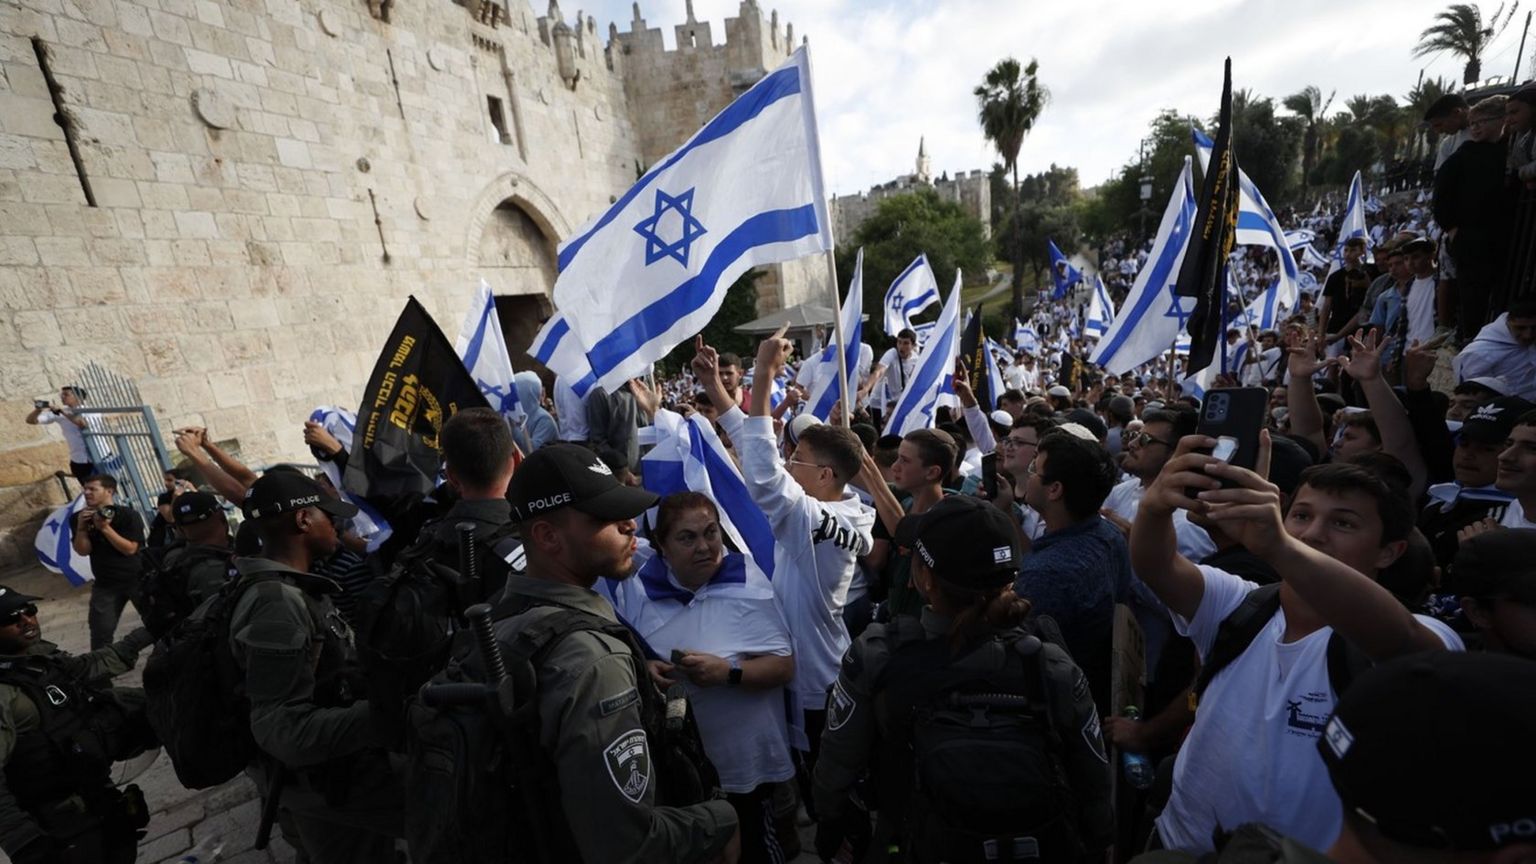 Israeli nationalists wave flags and make obscene gestures towards Palestinian and foreign journalists outside Damascus Gate, an entrance to Jerusalem's Old City (18 May 2023)